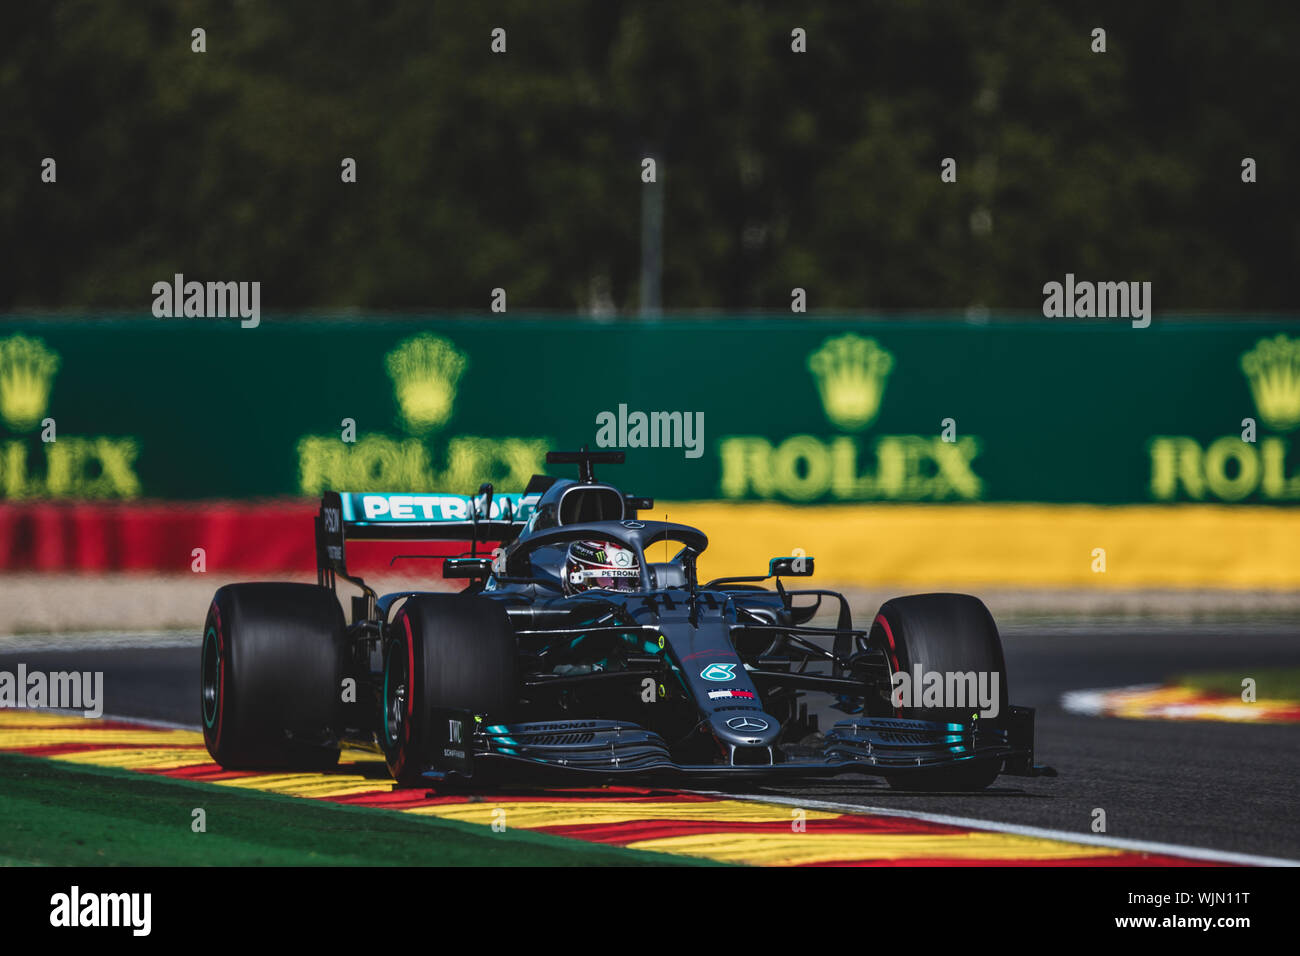 #44, Lewis Hamilton, GBR, Mercedes, in action during the Belgian Grand Prix at Spa Francorchamps Stock Photo